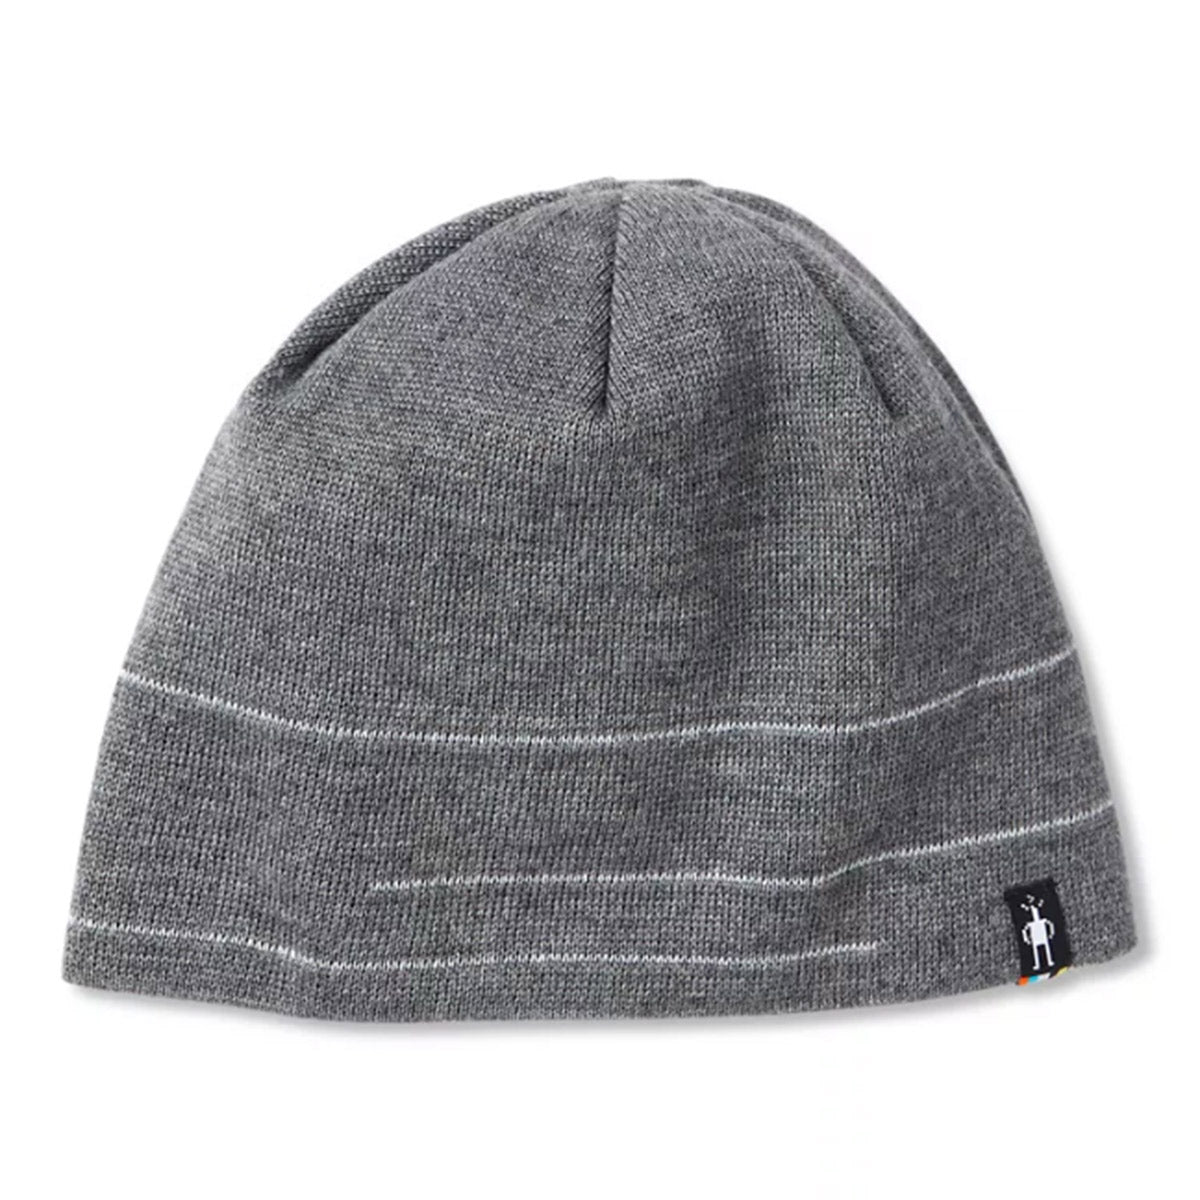 Medium grey knitted beanie with logo detail by Smartwool.